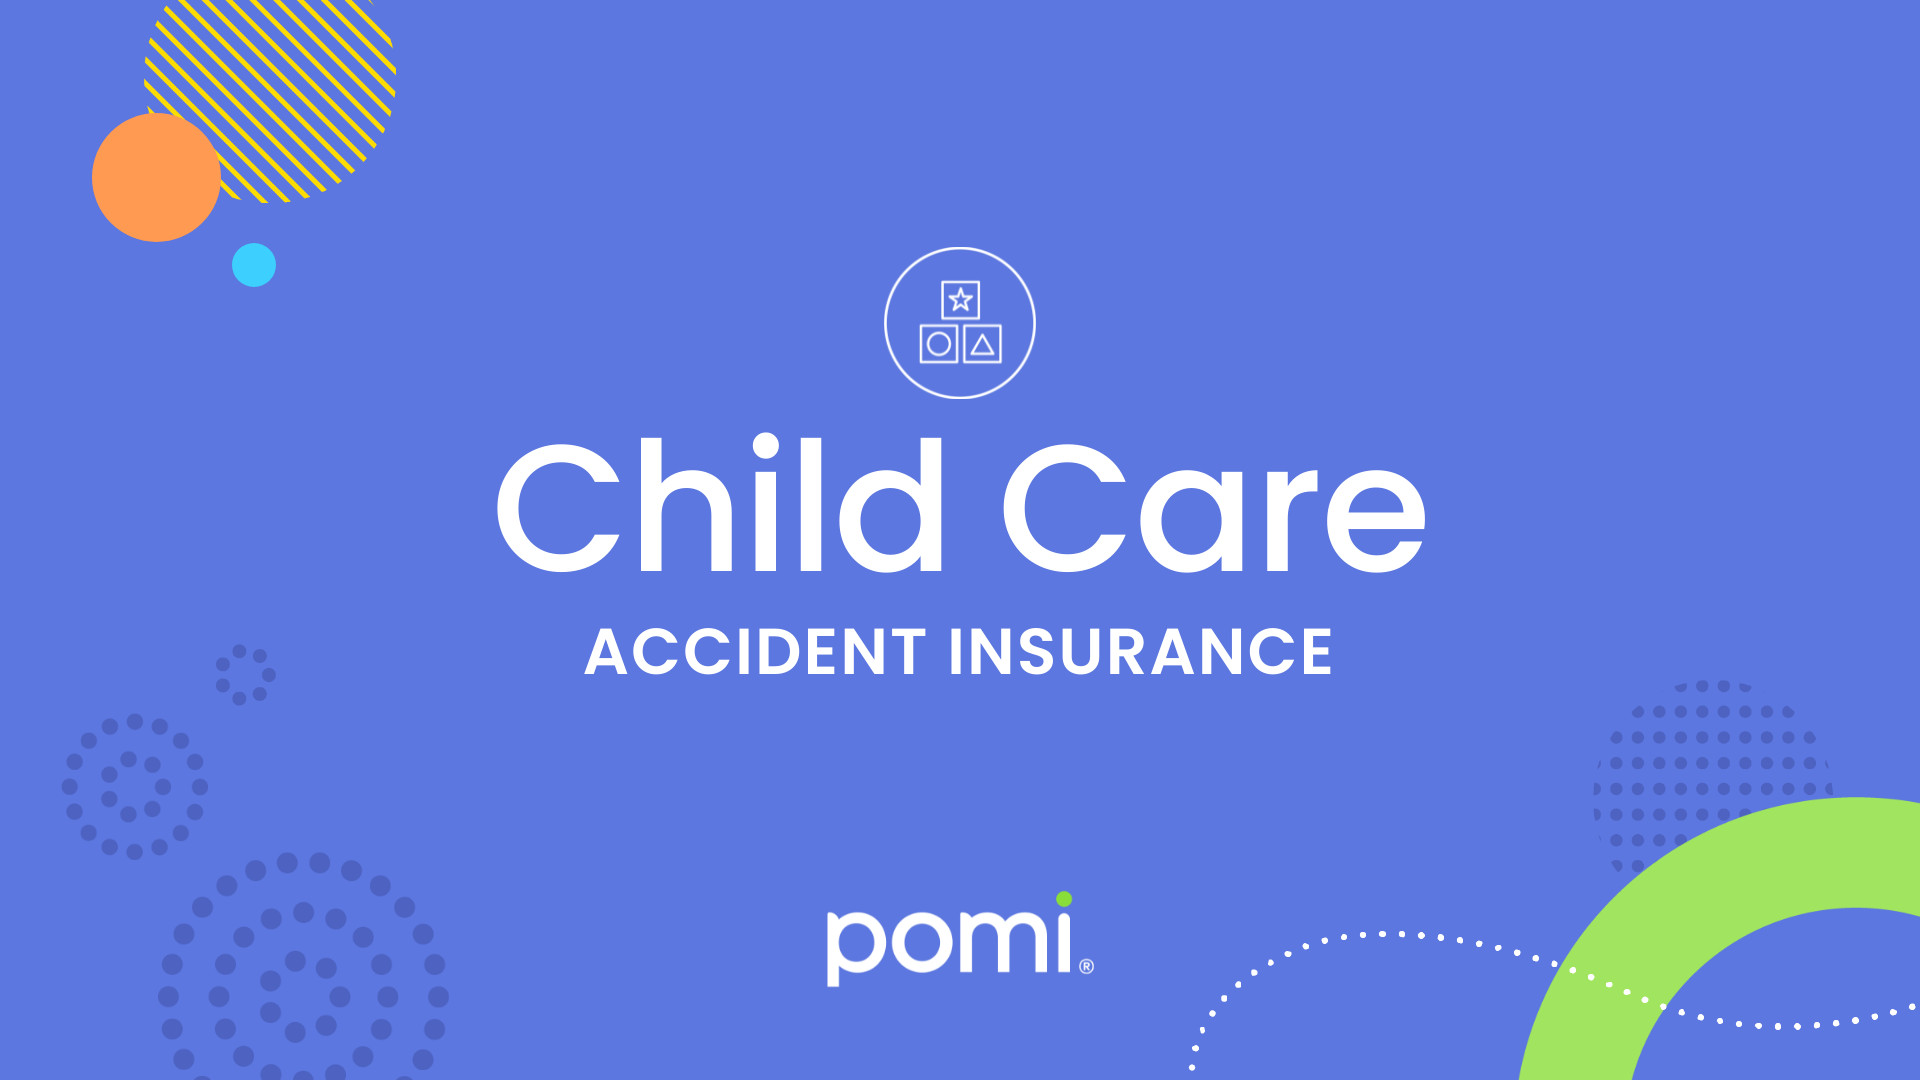 childcare_01_intro-high-quality